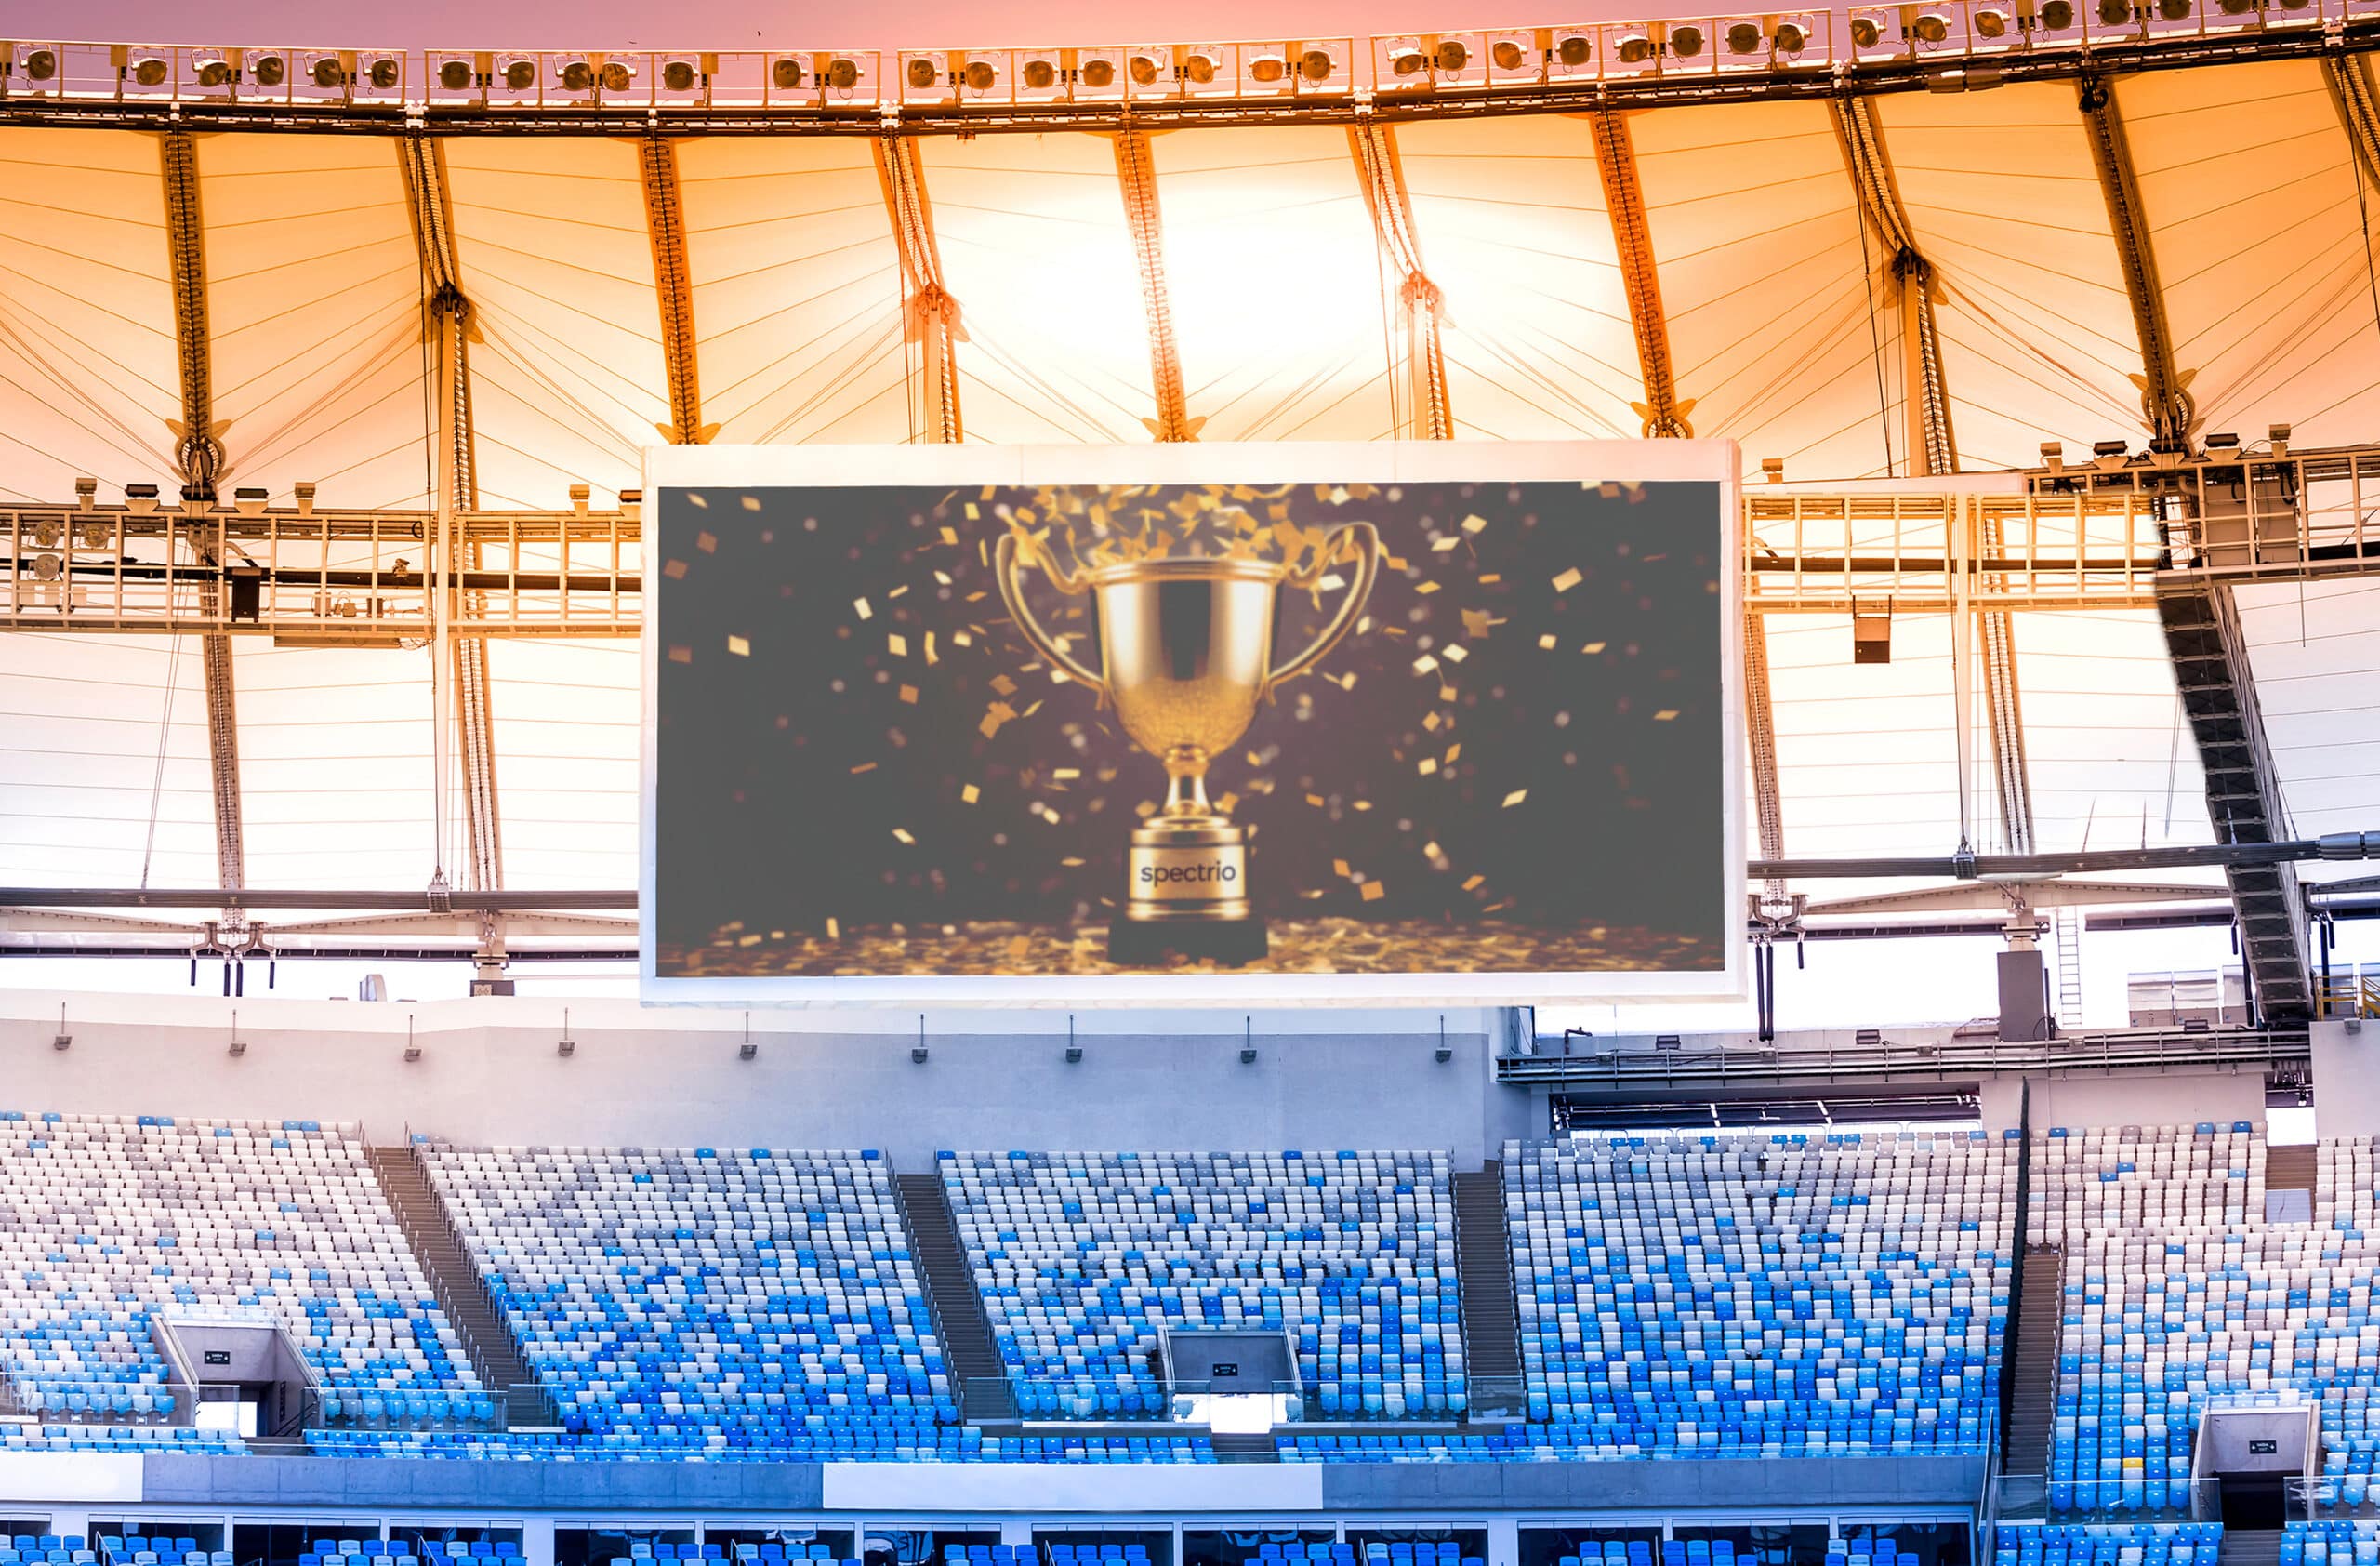 Large video screen hanging in a stadium with an image of a trophy with confetti and the inscription of Spectrio on the base